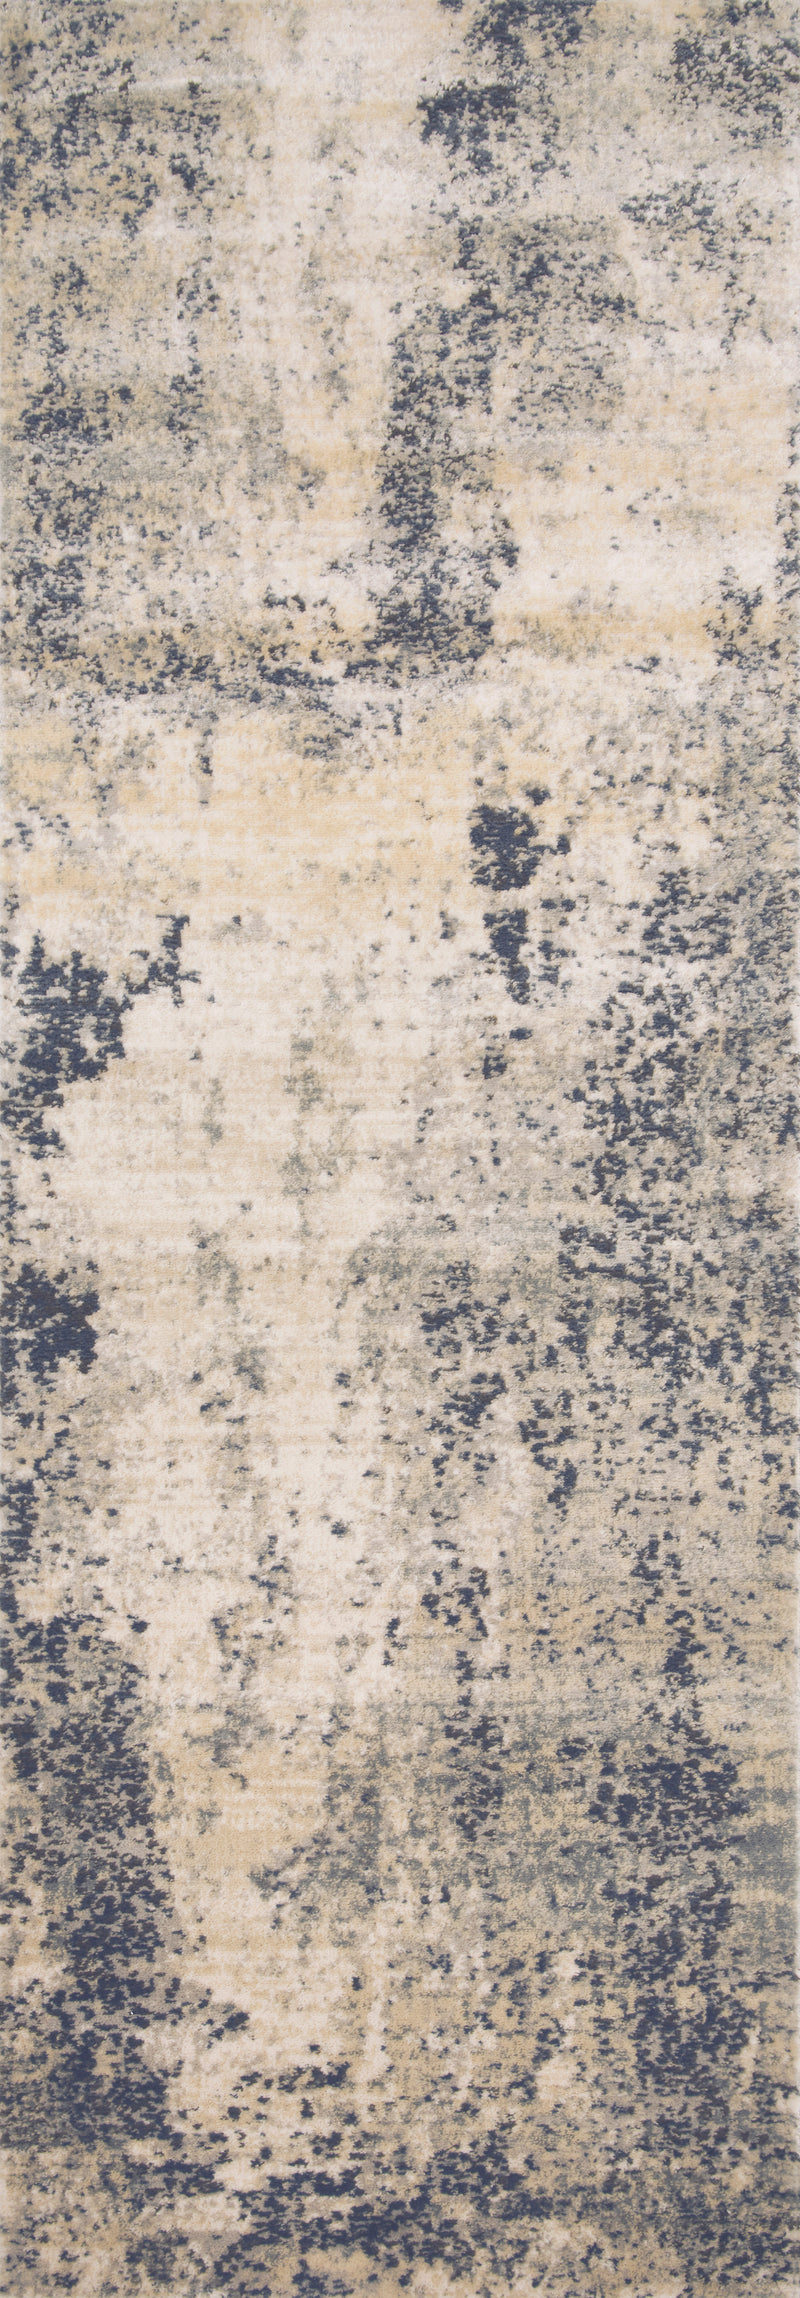 media image for Teagan Rug in Natural / Denim by Loloi II 21